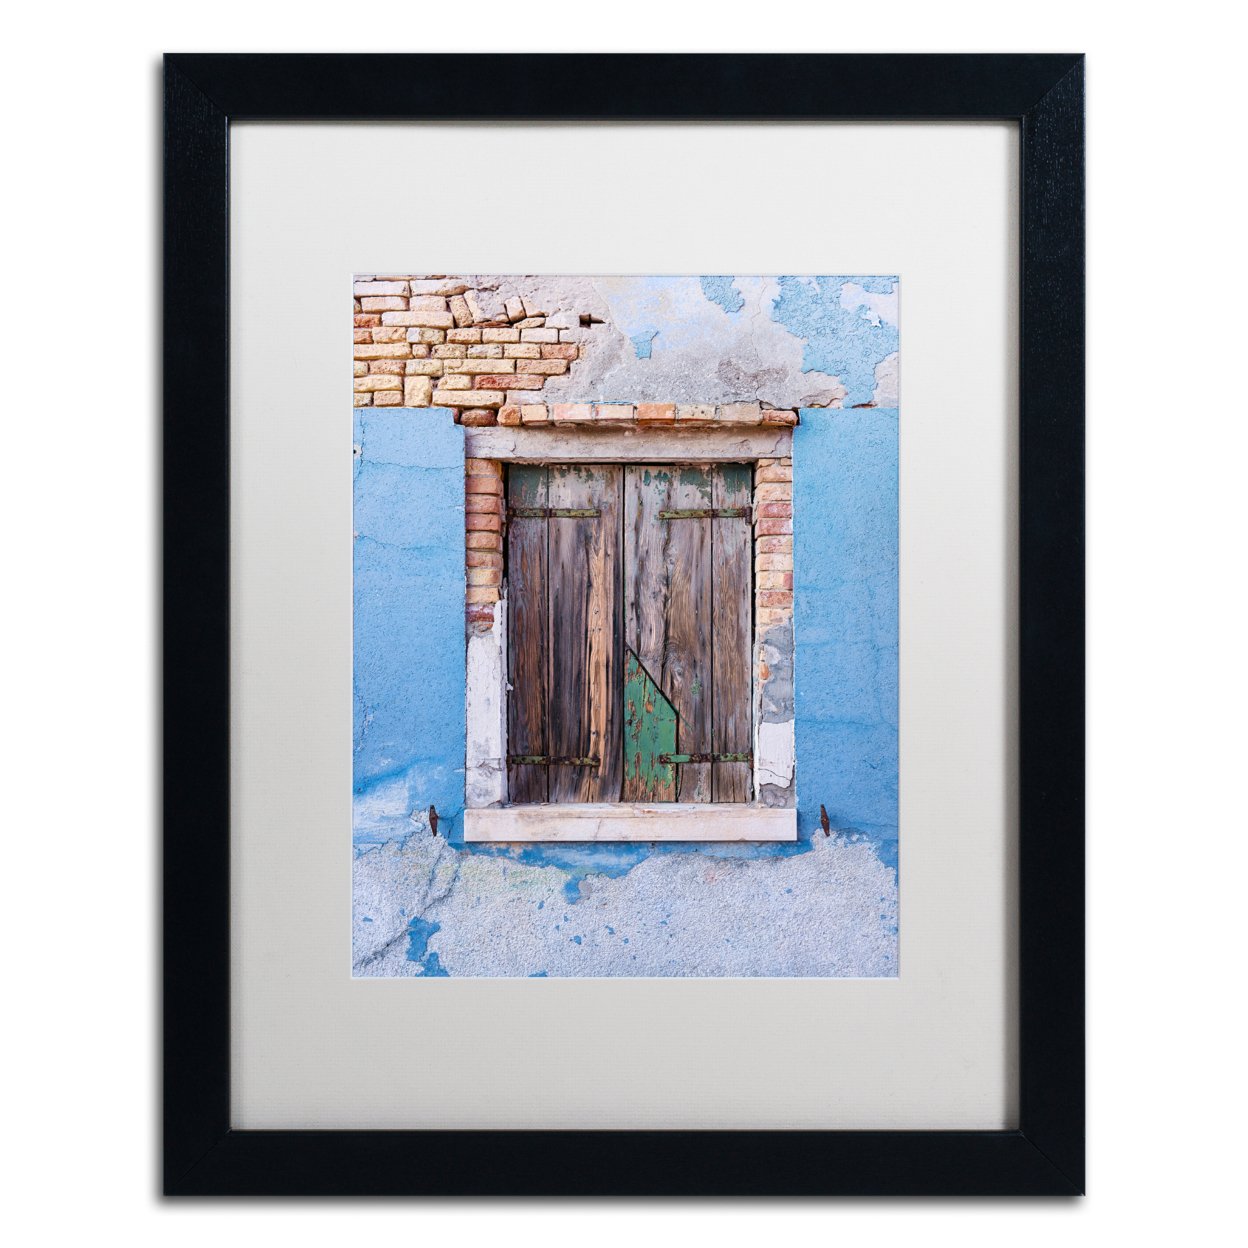 Michael Blanchette Photography 'Once Blue' Black Wooden Framed Art 18 X 22 Inches